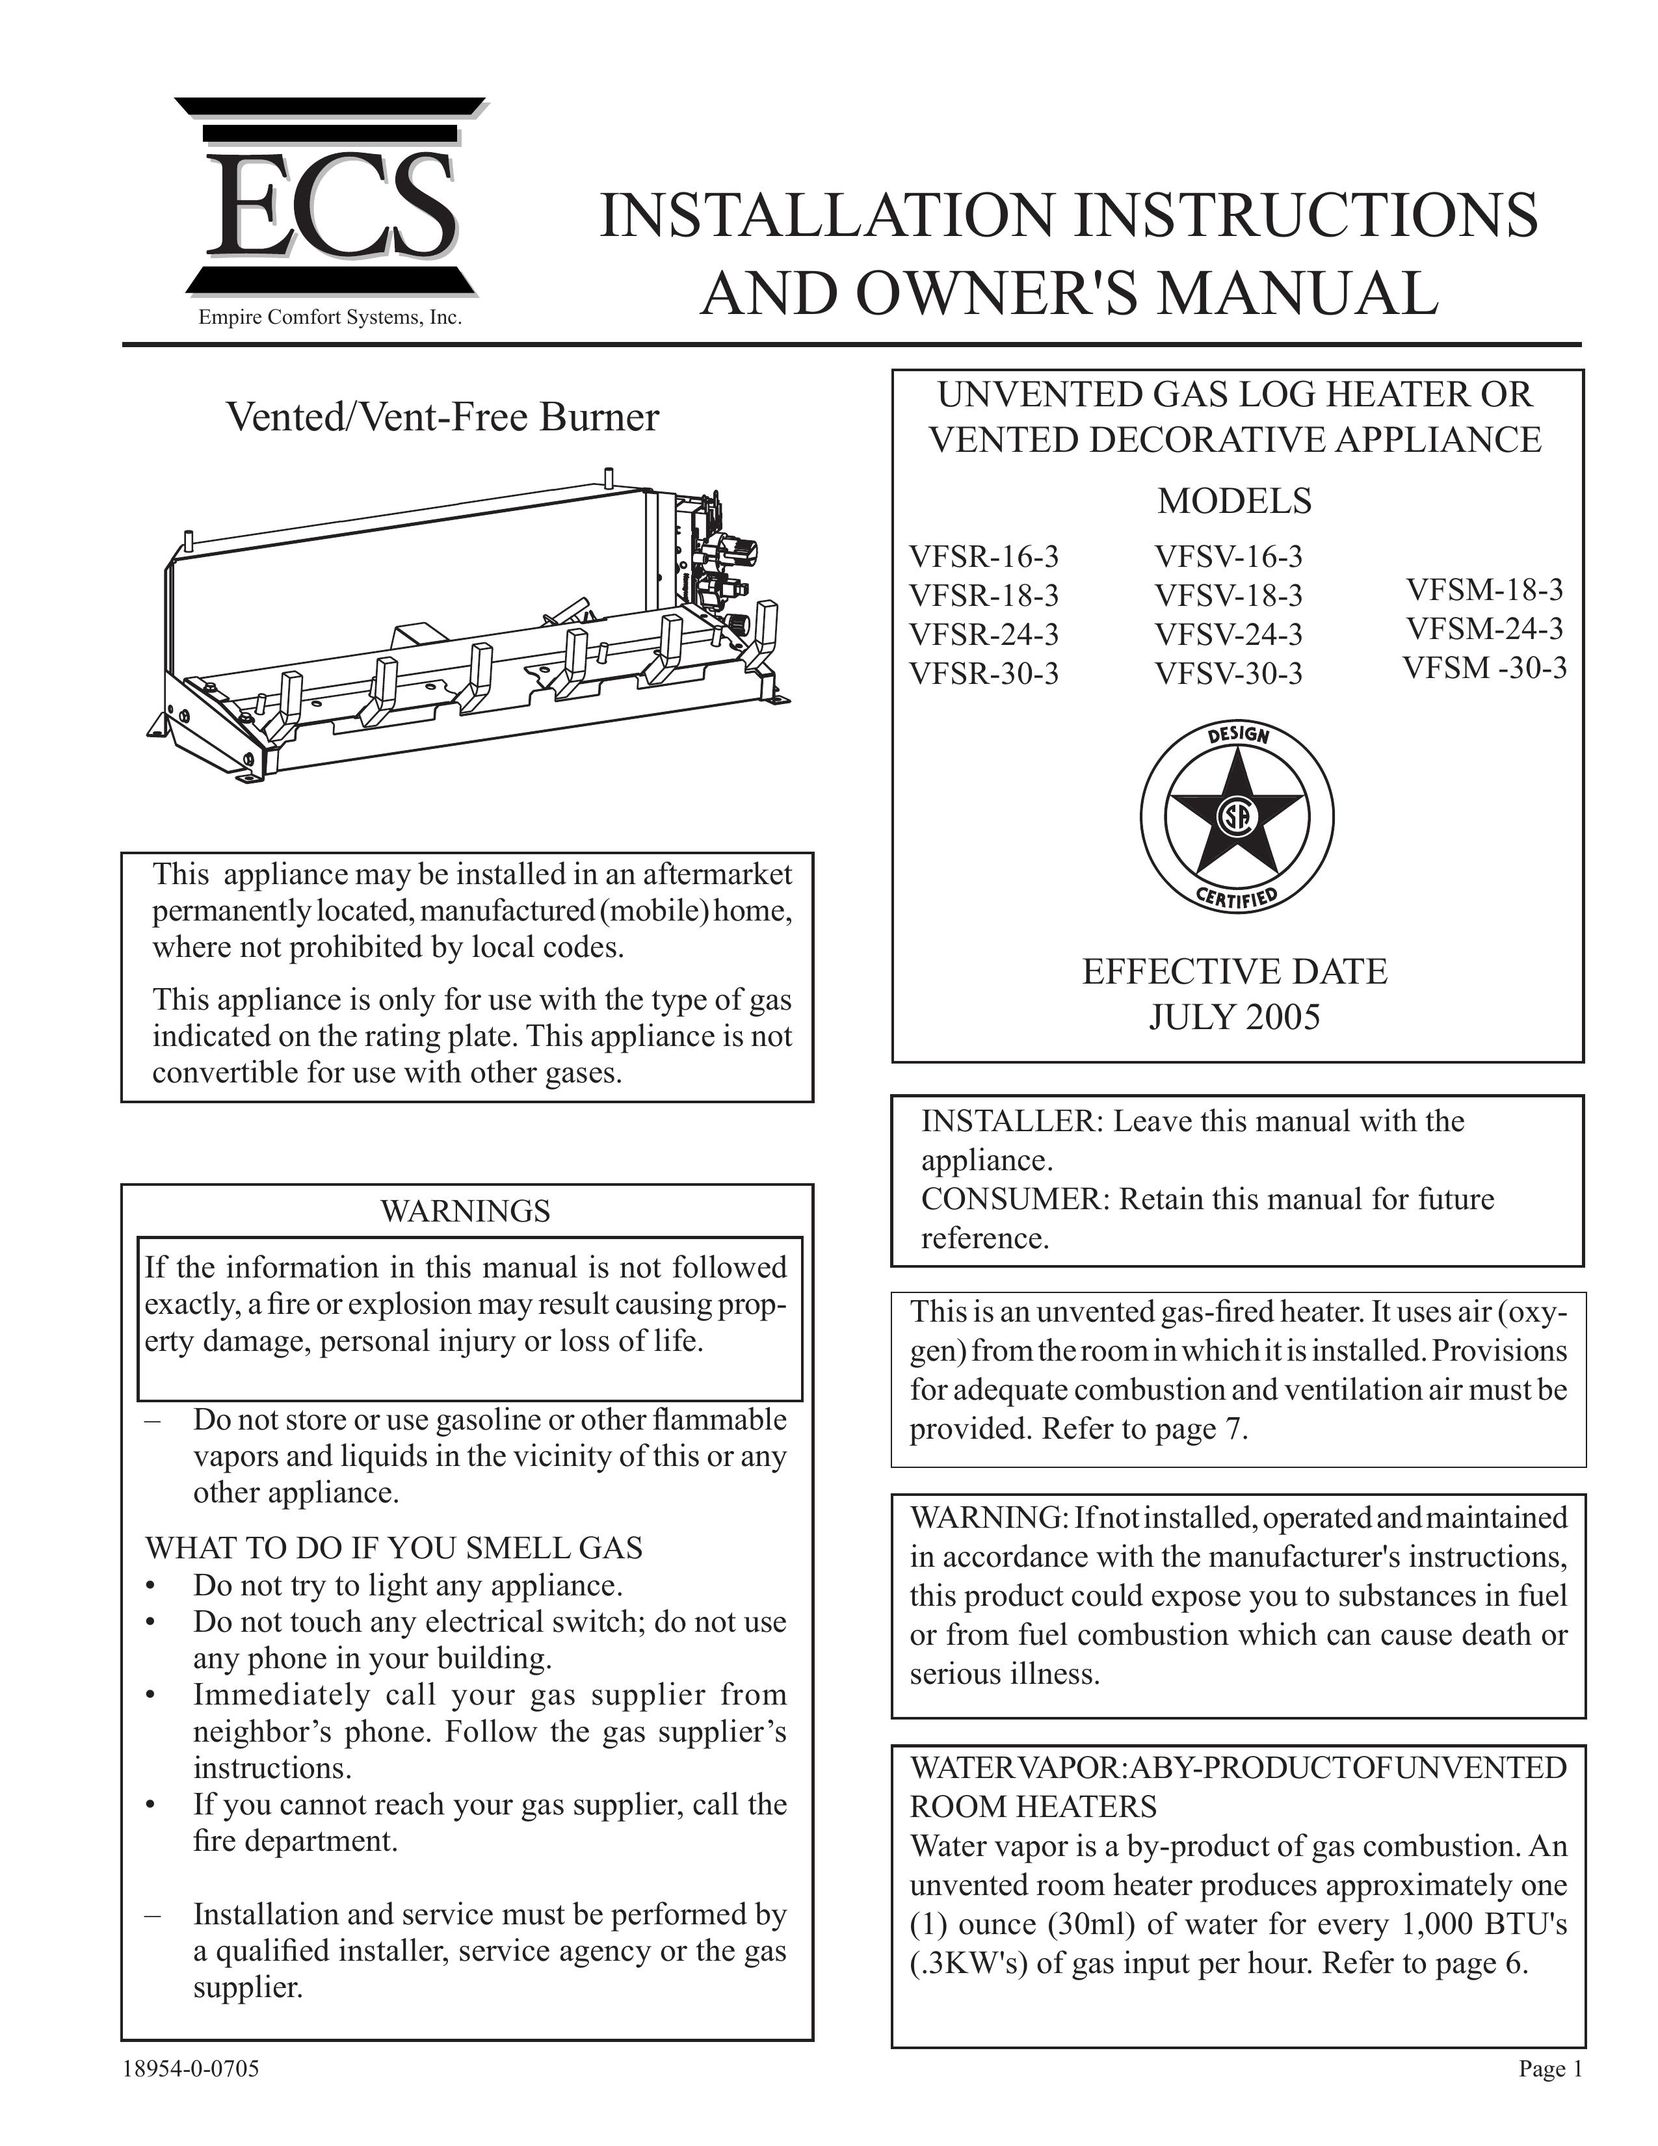 Empire Comfort Systems VFSR-24-3 Electric Heater User Manual (Page 1)